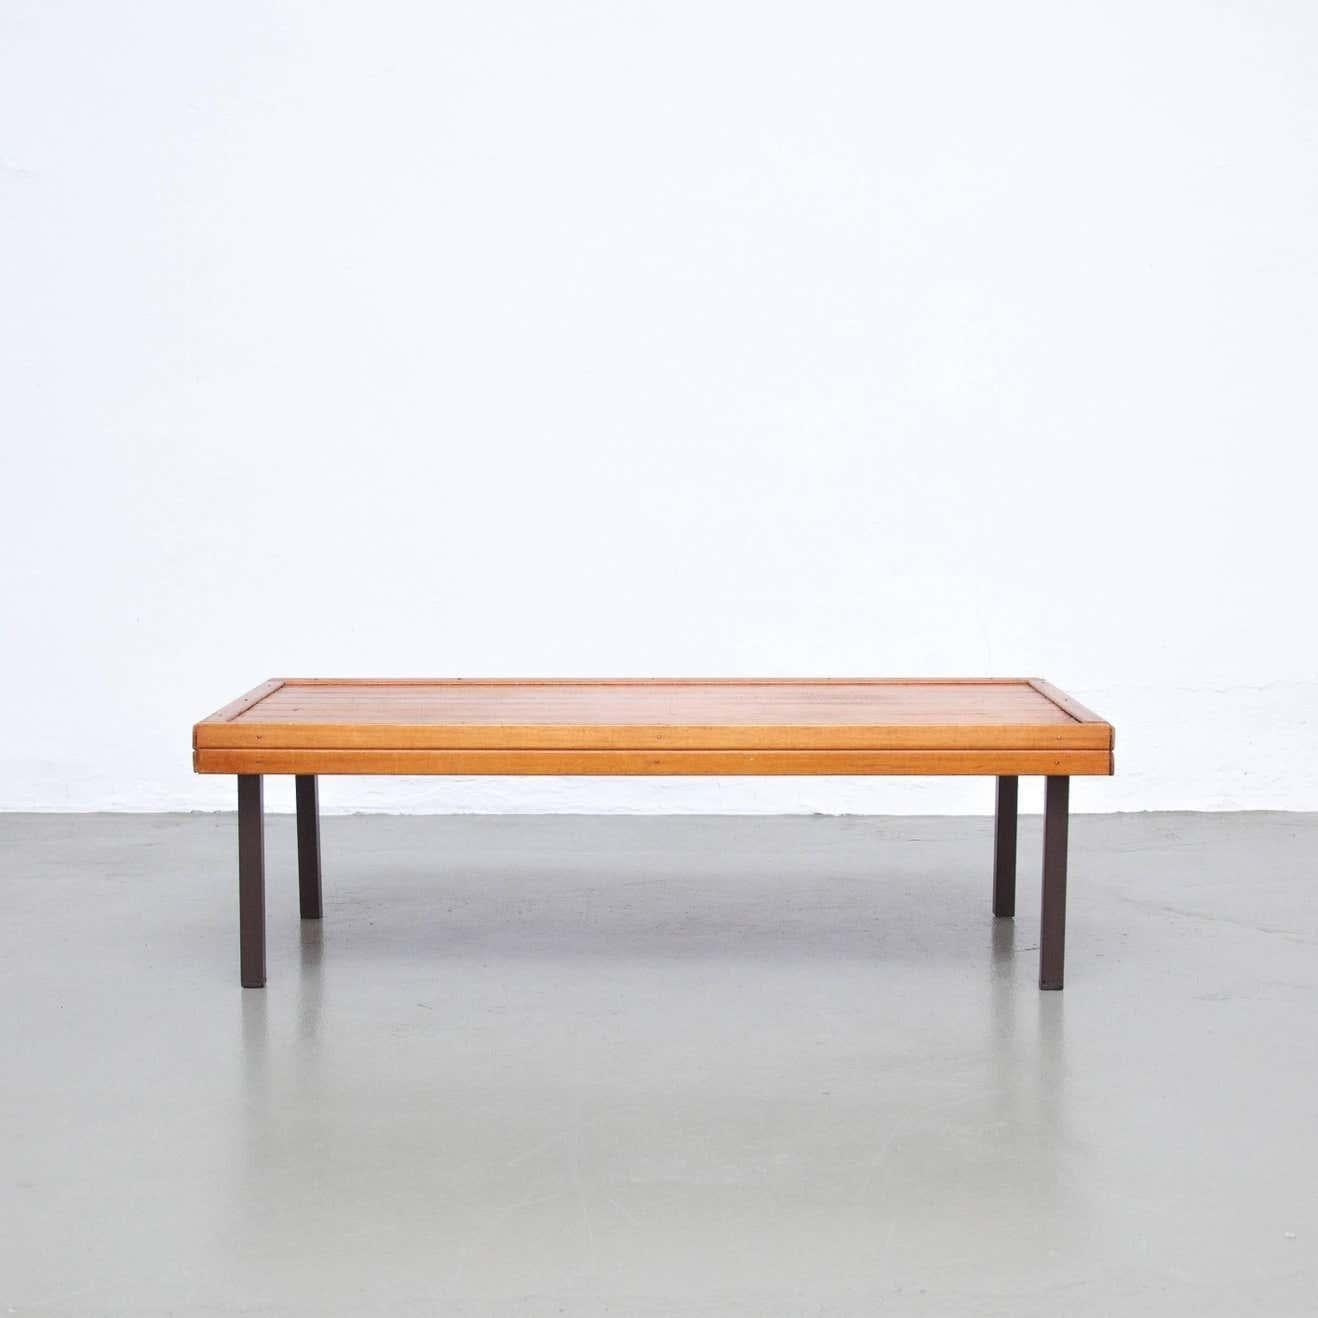 Mid-century formalist bench by unknown designer.
Manufactured in France, circa 1960.

In great original condition, with minor wear consistent with age and use, preserving a beautiful patina.